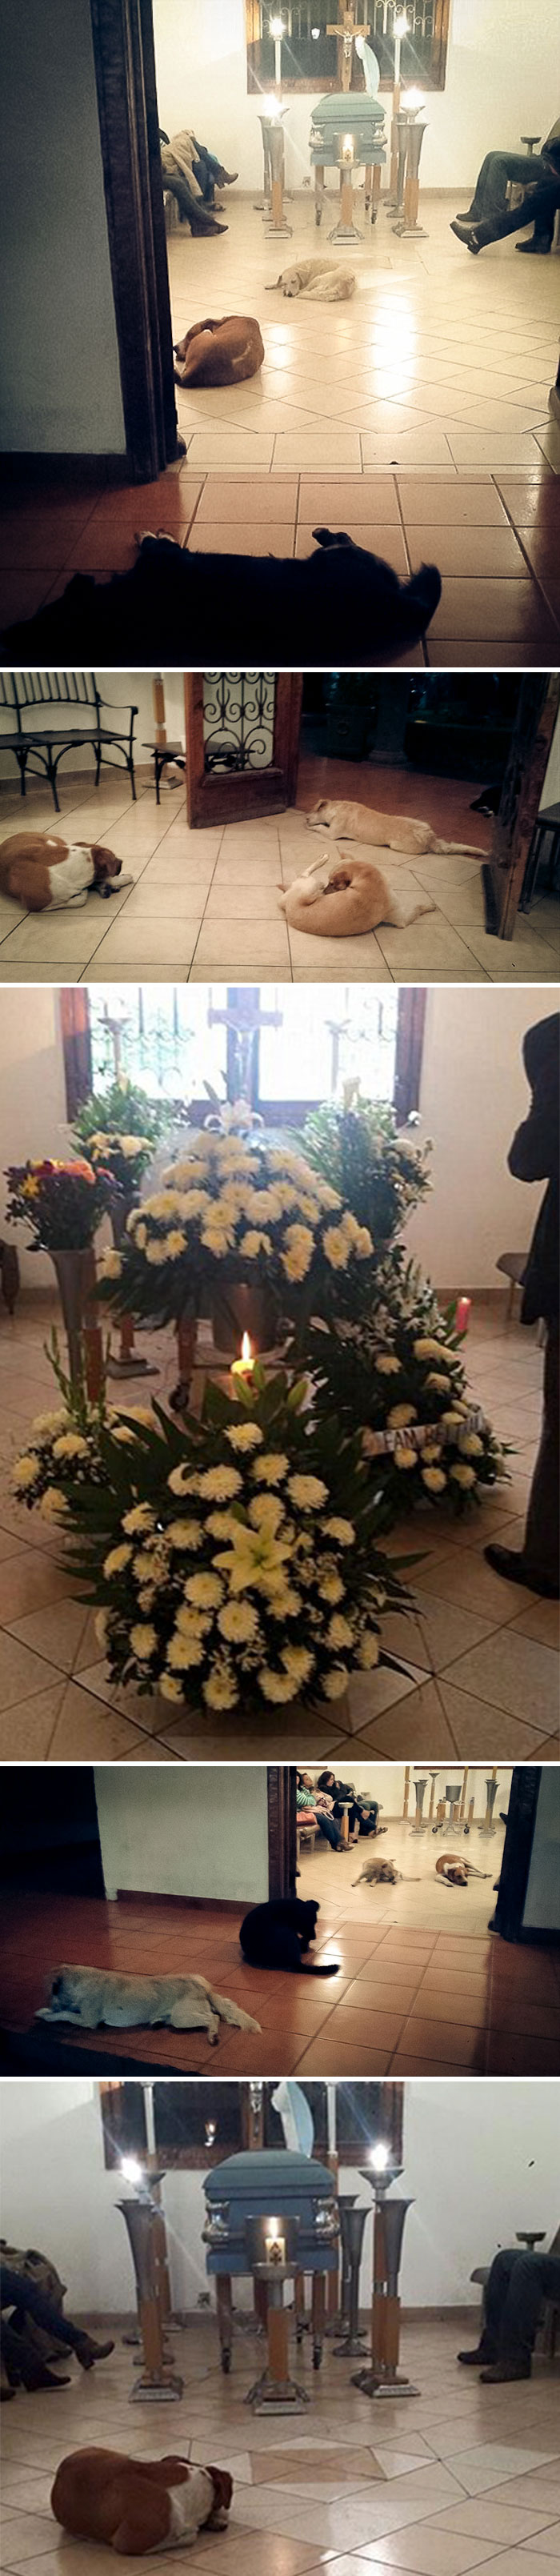 Stray Dogs Suddenly Show Up At Funeral Of Woman Who Spent Her Life Feeding Them